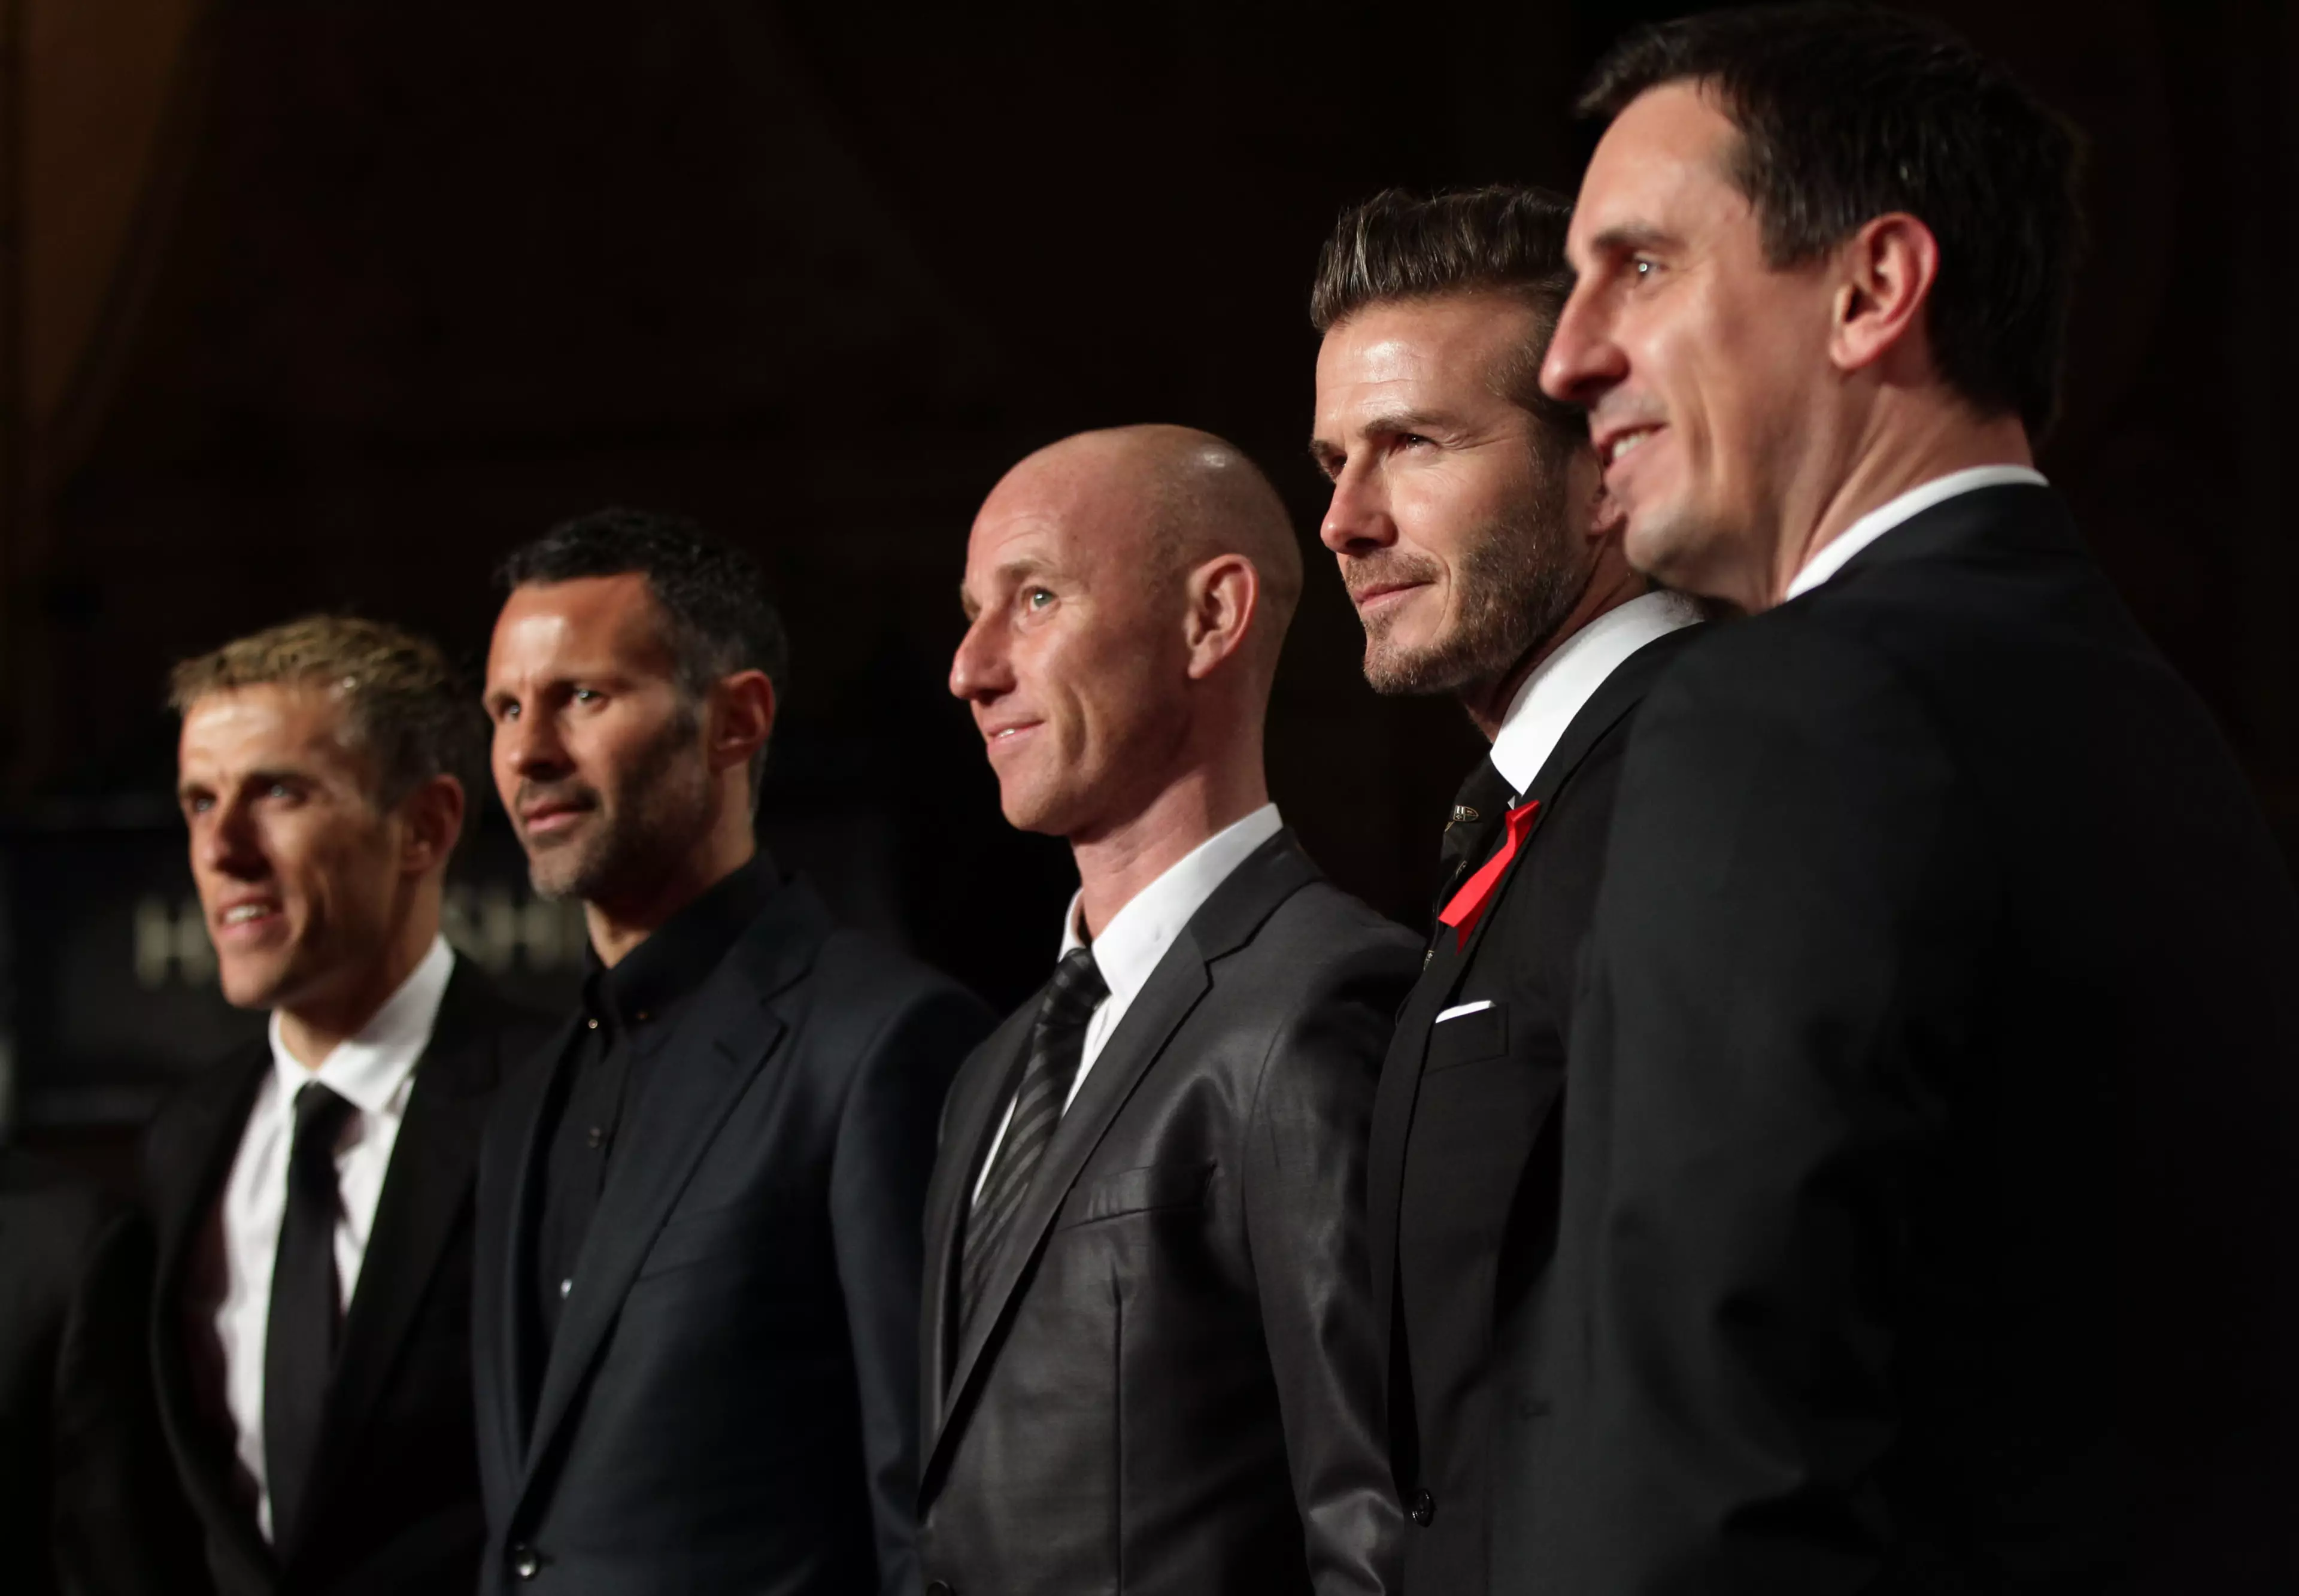 The Class of 92 can be quite prominent in the media now. Image: PA Images